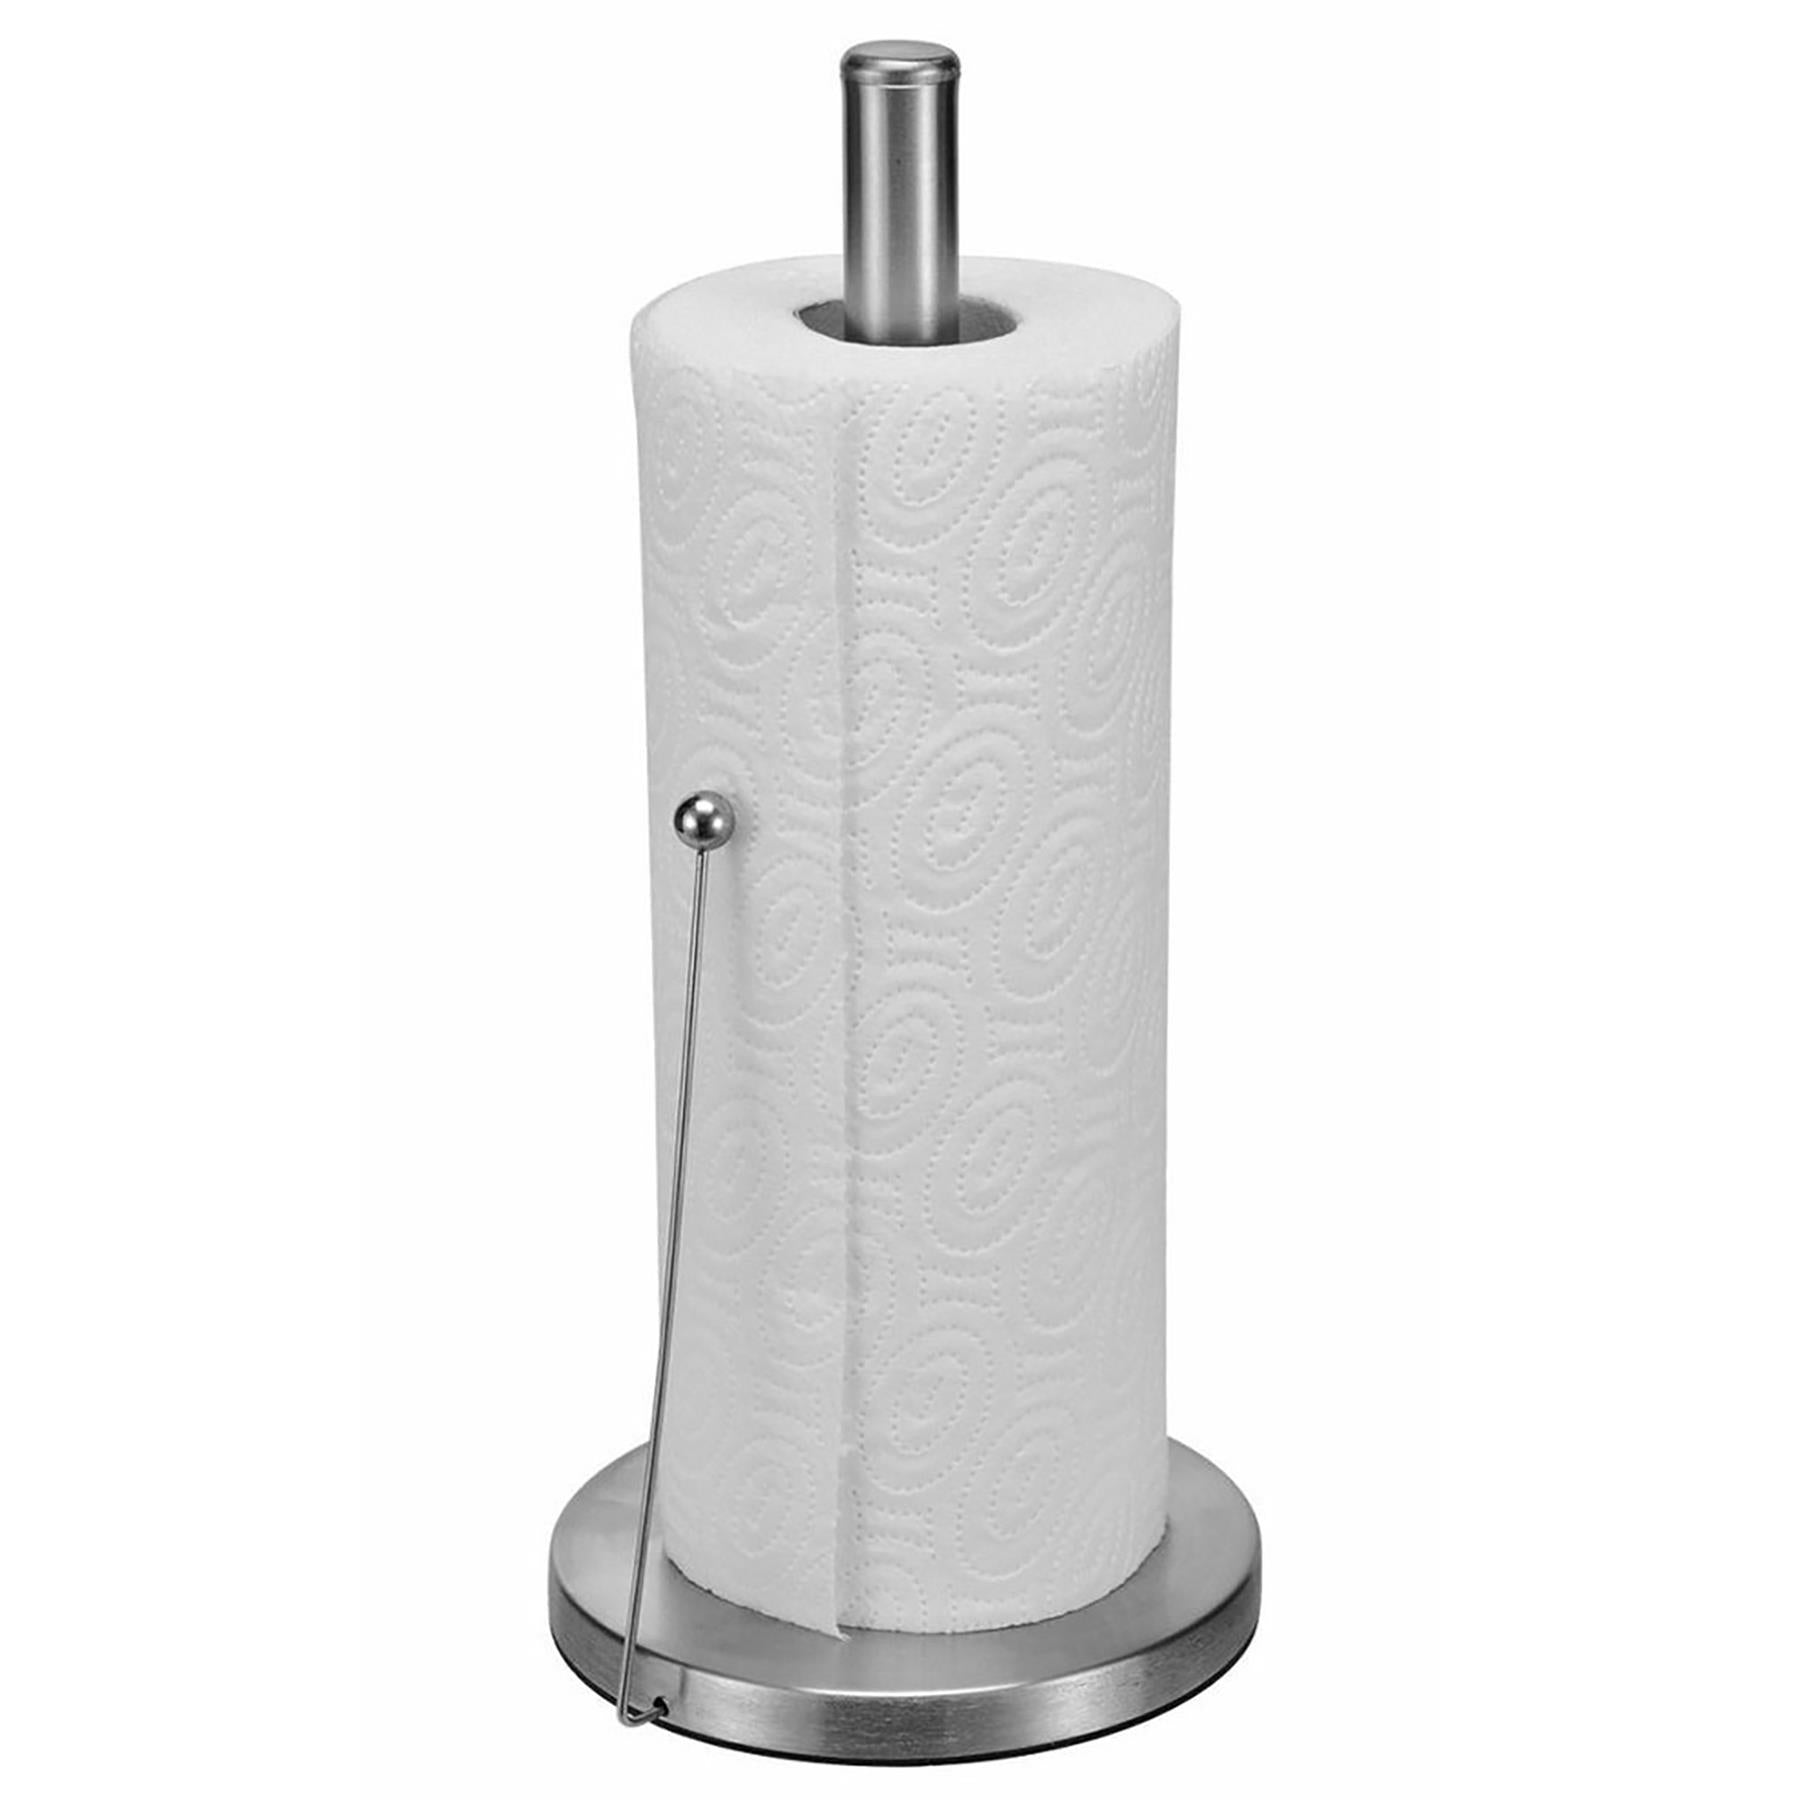 Stainless Steel Kitchen Roll Holder by Geezy - UKBuyZone